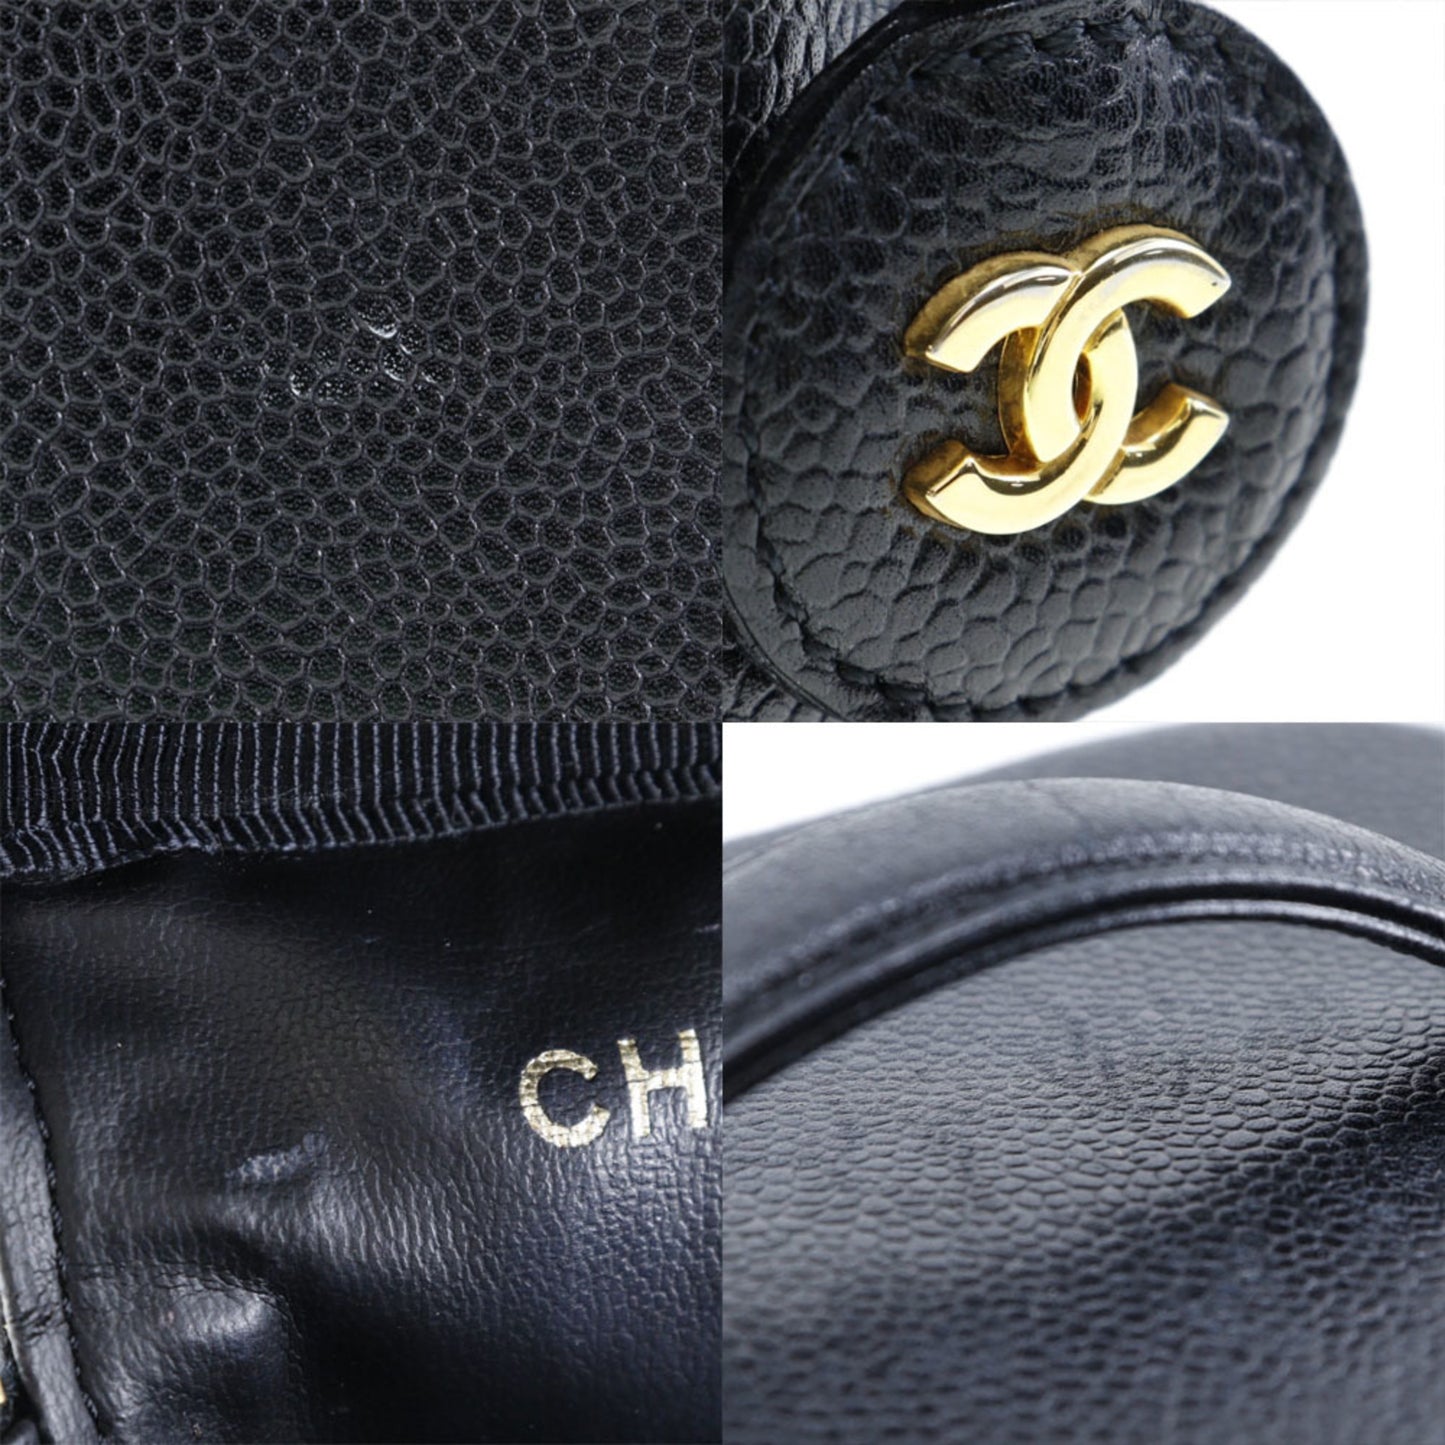 Chanel Women's Leather Vanity Handbag with Timeless Design - Excellent Condition in Black